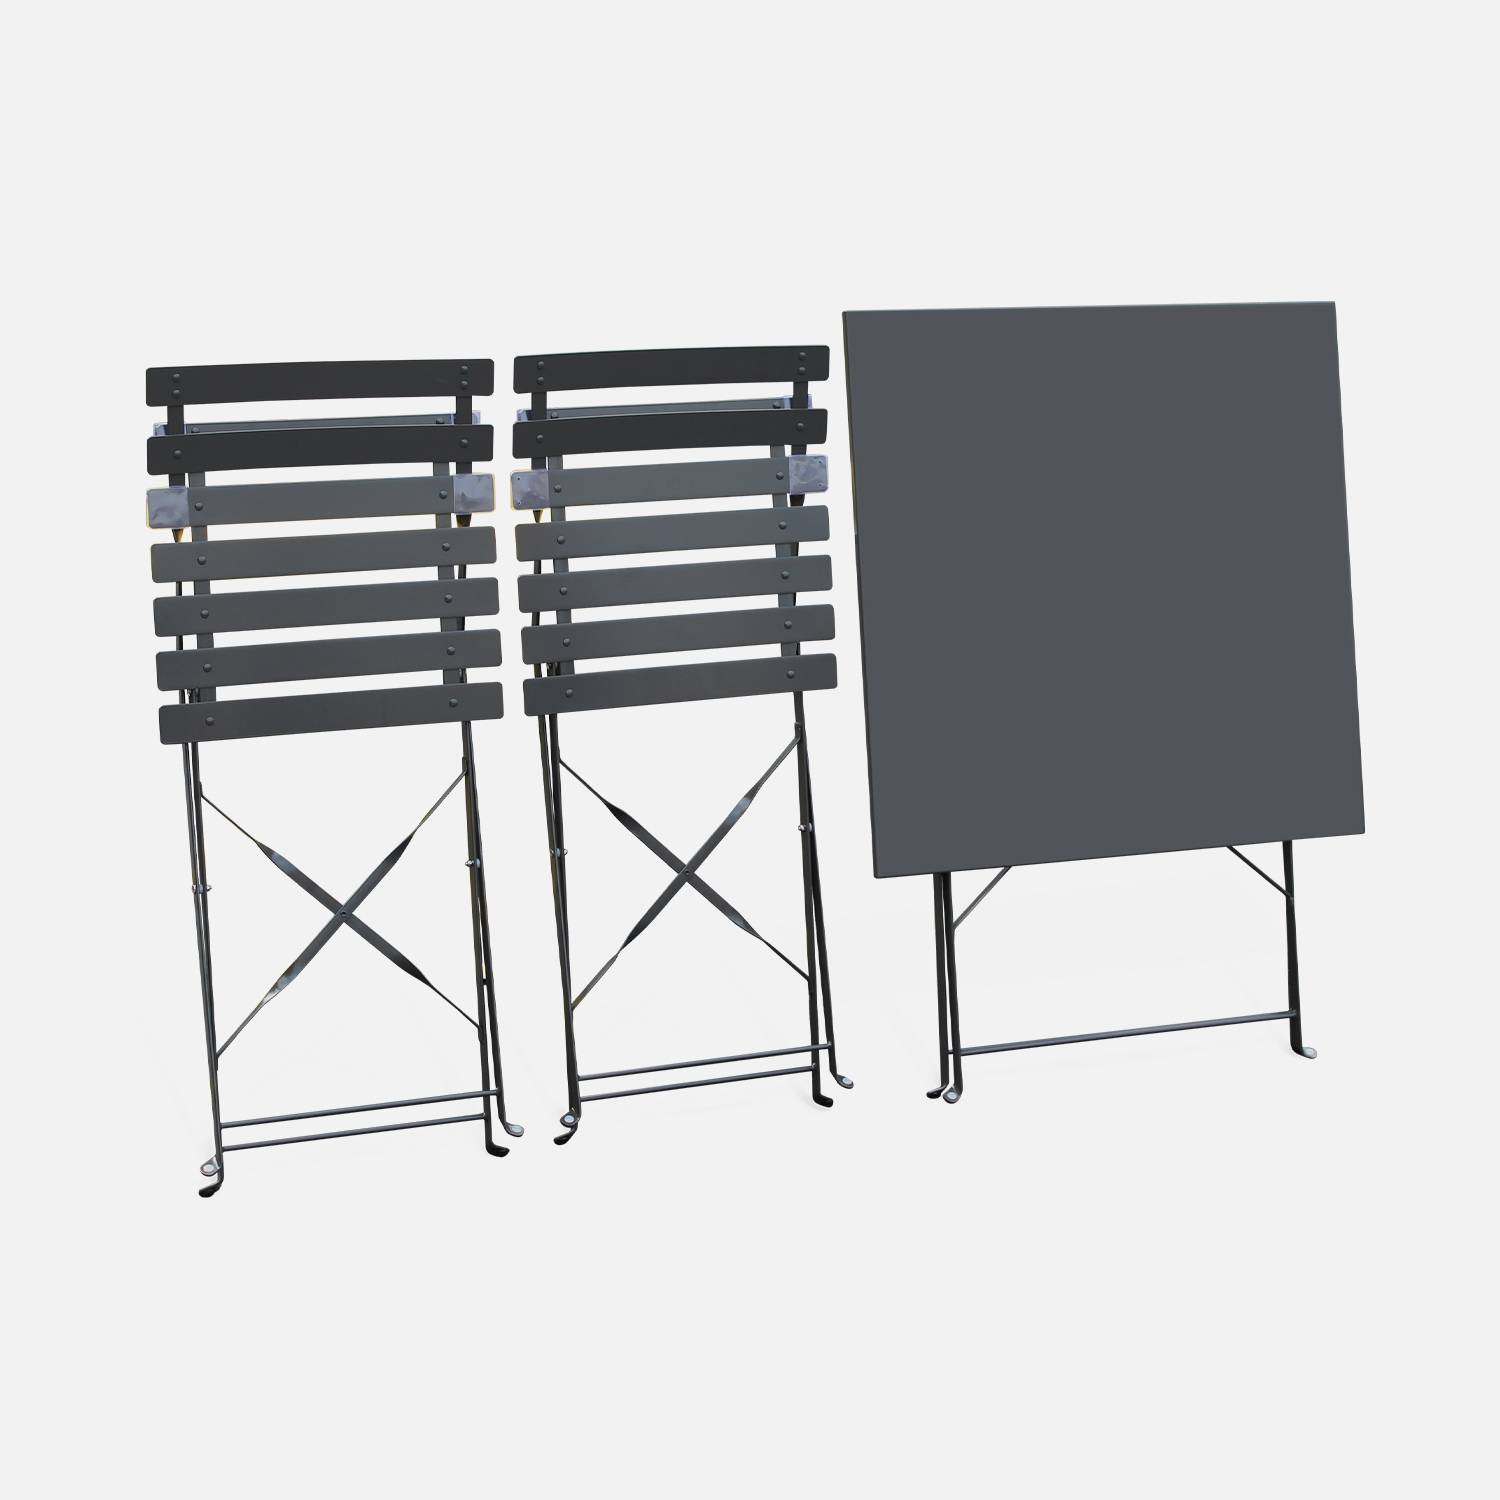 2-seater foldable thermo-lacquered steel bistro garden table with chairs, 70x70cm - Emilia - Anthracite Photo6